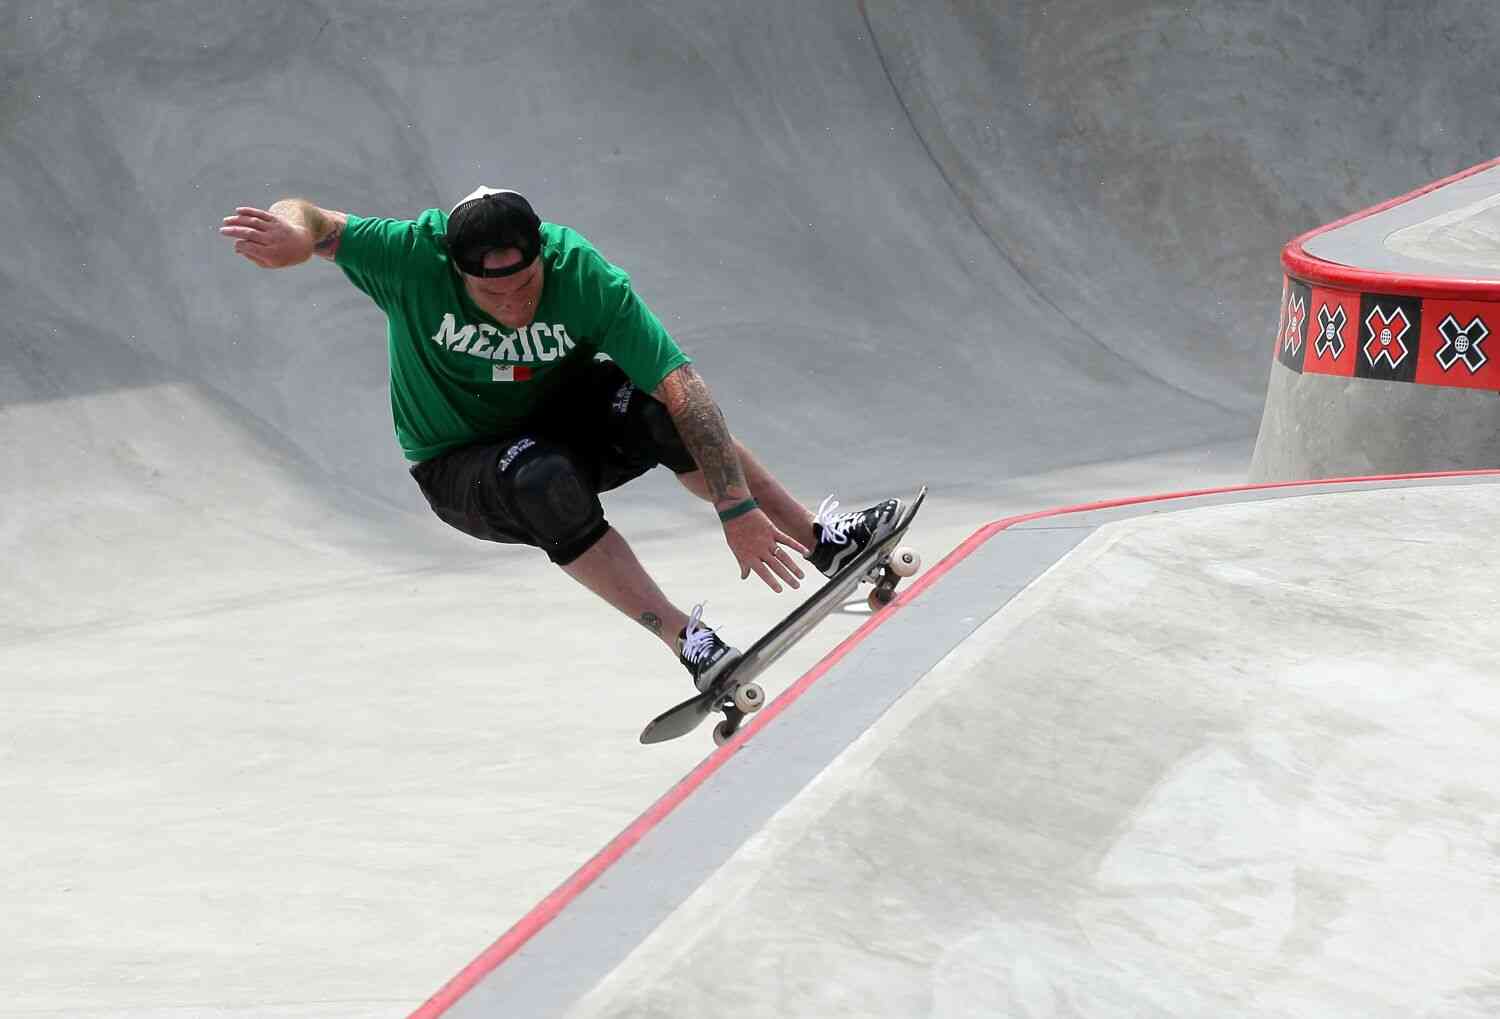 Ticketmaster to buy X Games brand for $1.3 billion